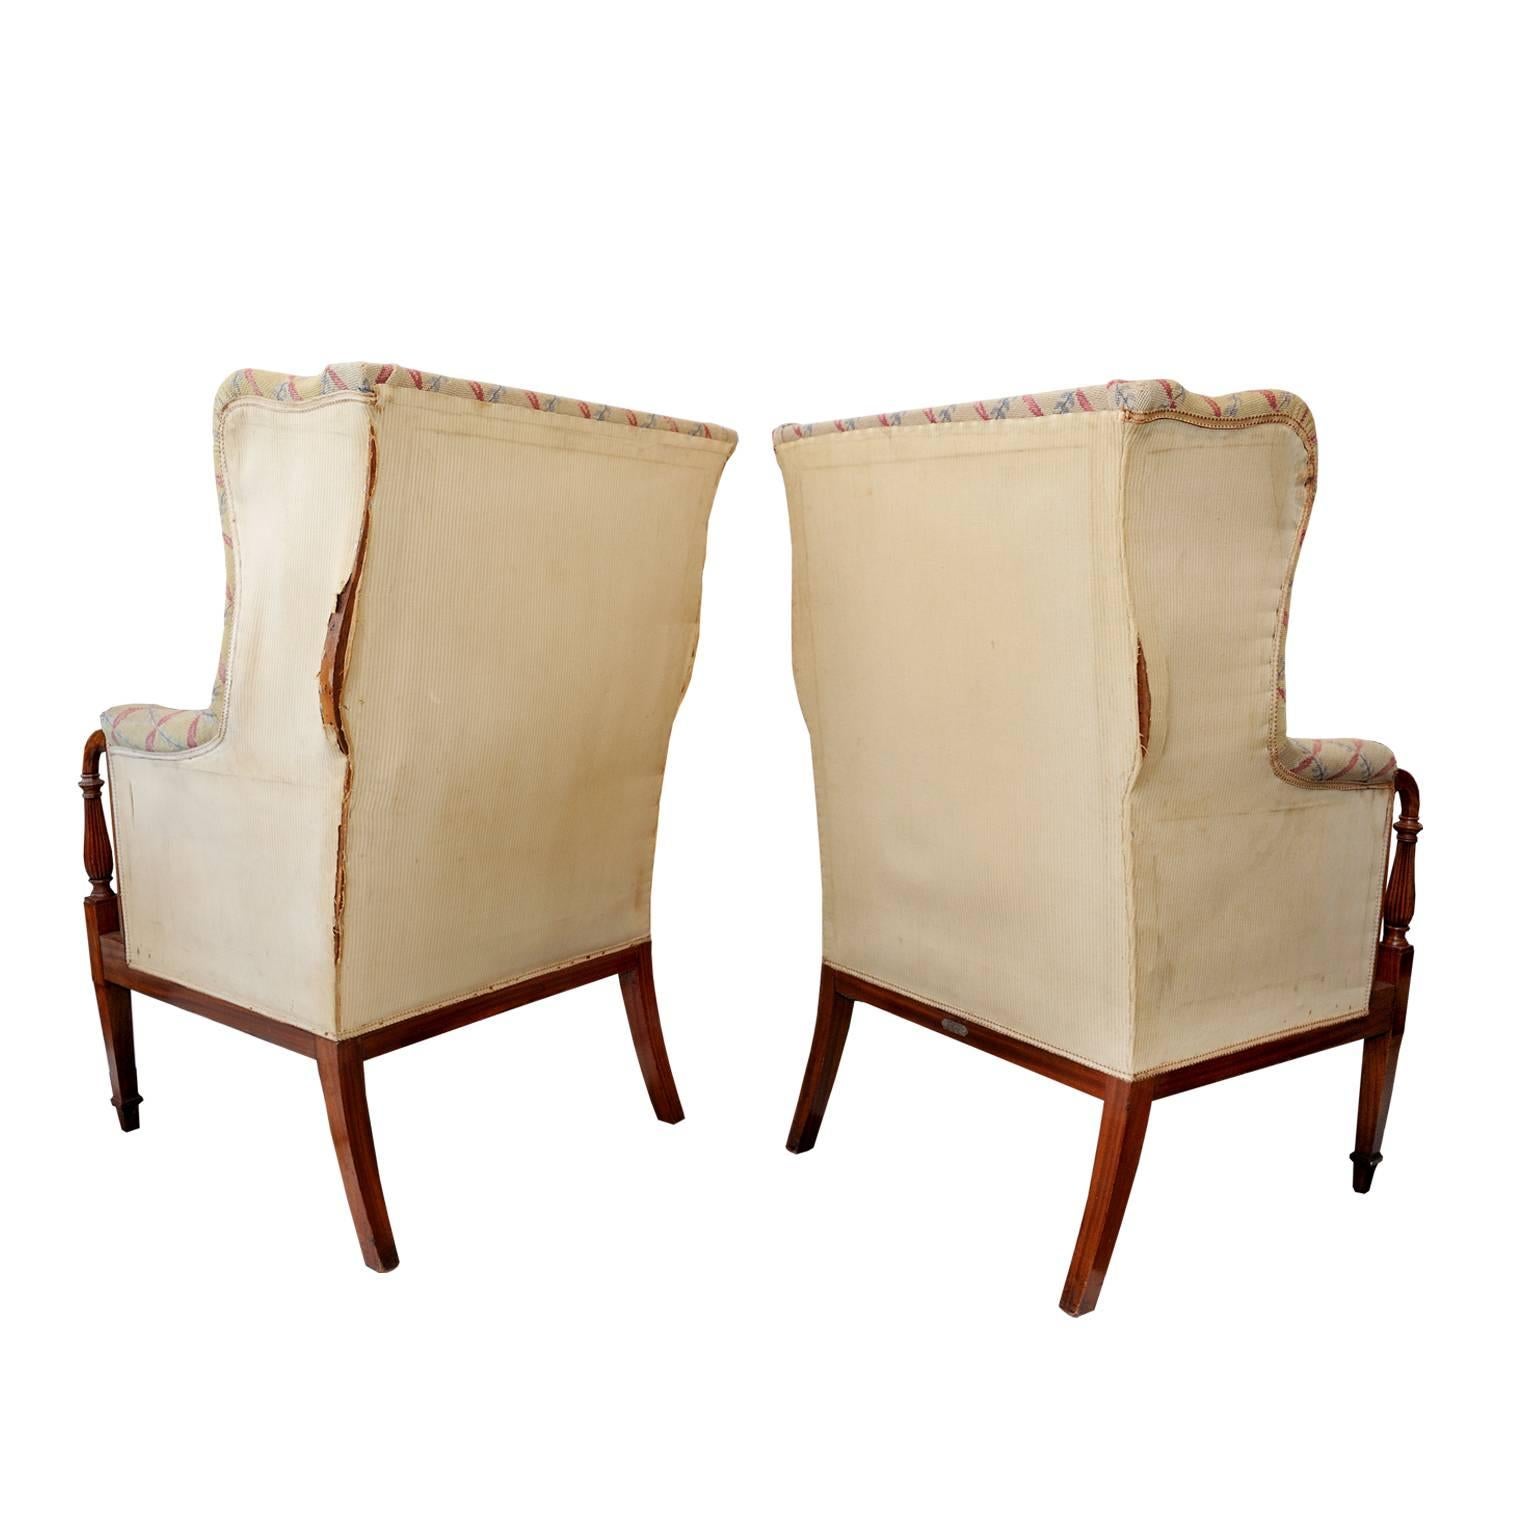 Needlepoint Rare Pair of English Country House Satinwood Wing Chairs, circa 1890